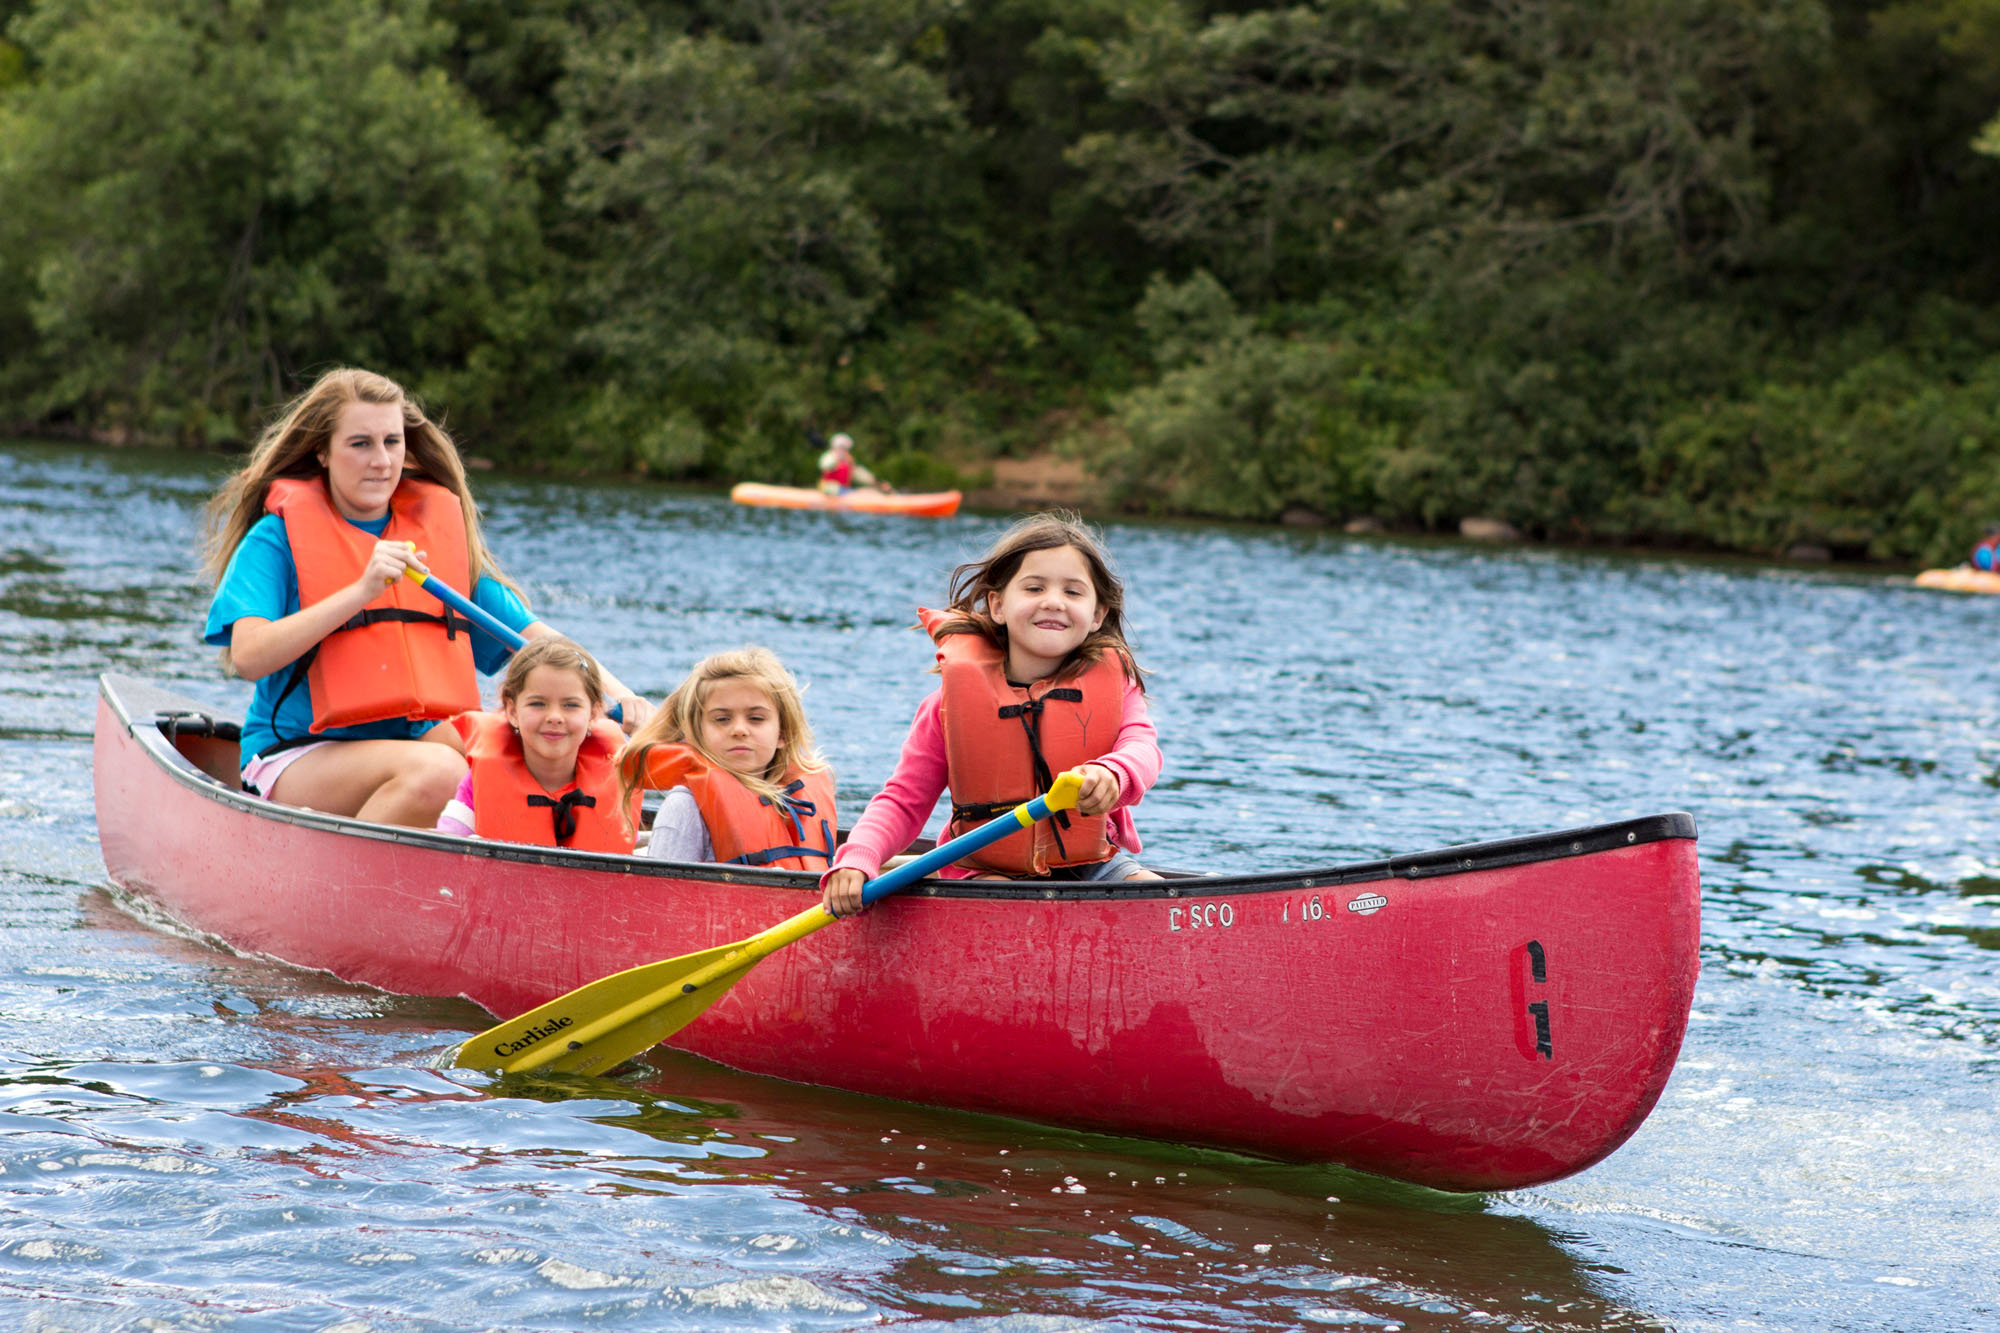 A woman and three girls paddle a red canoe on a lake